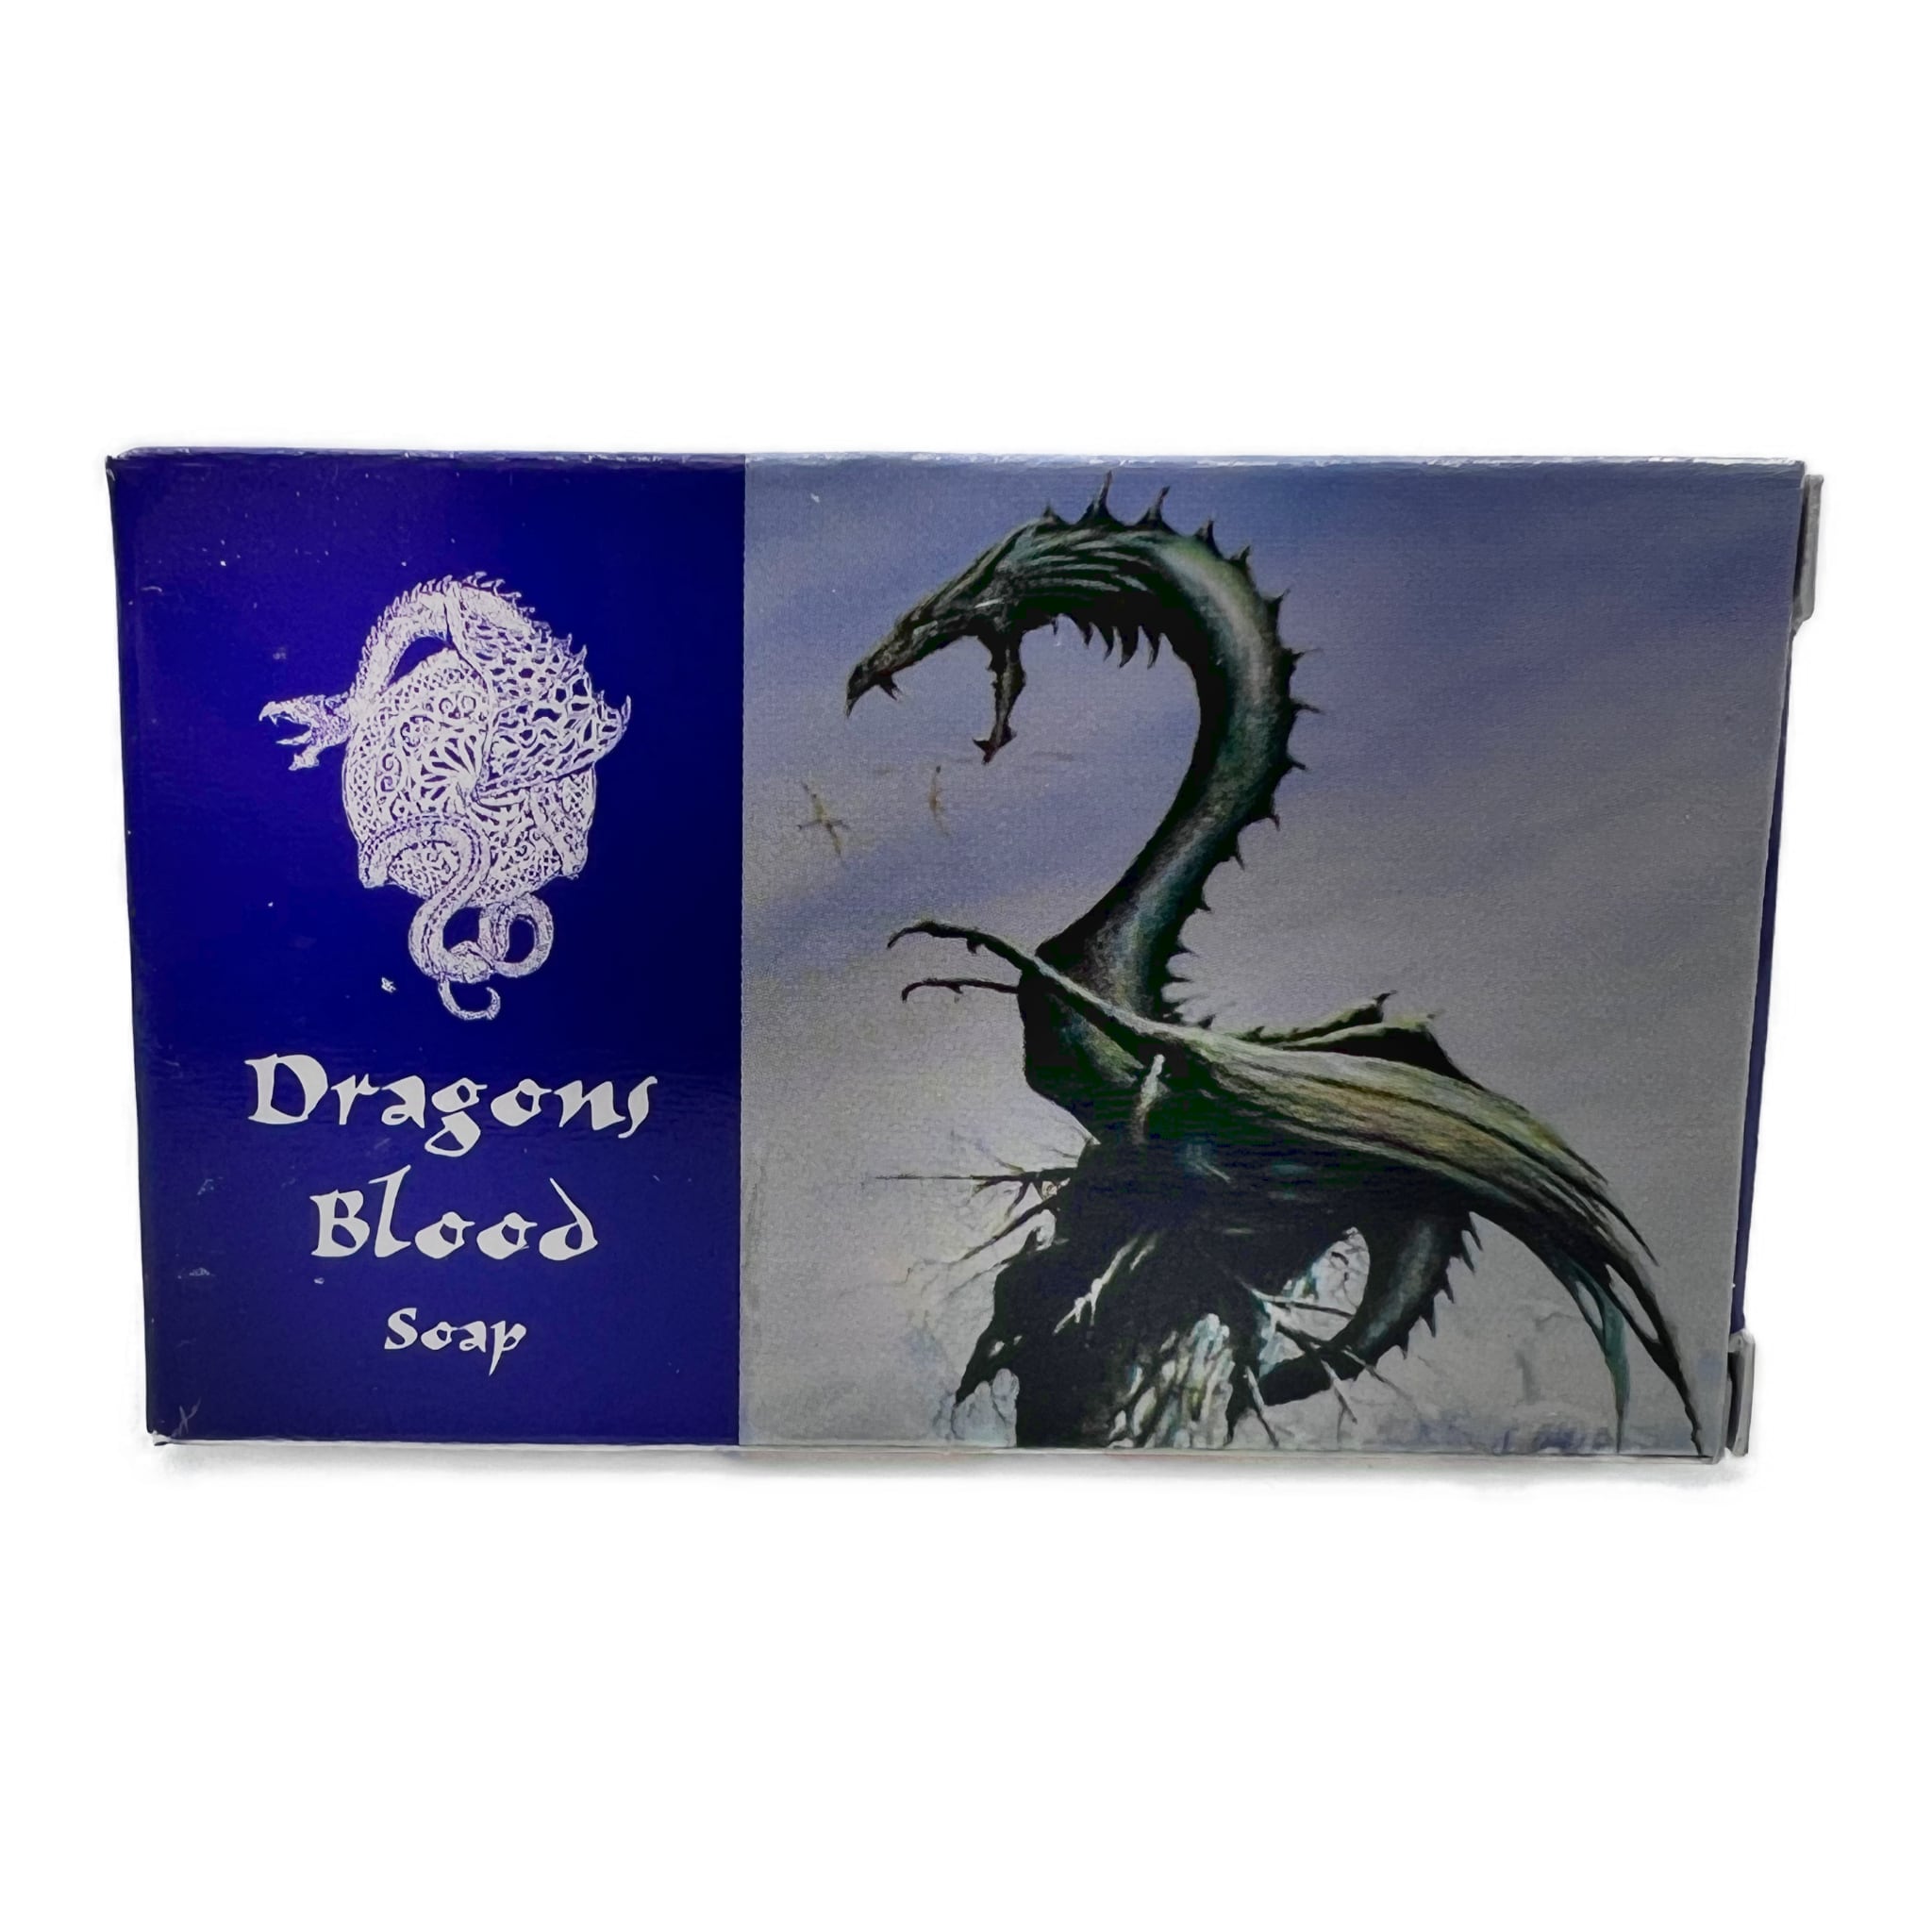 Blue Box with image of dragon  dragons blood soap